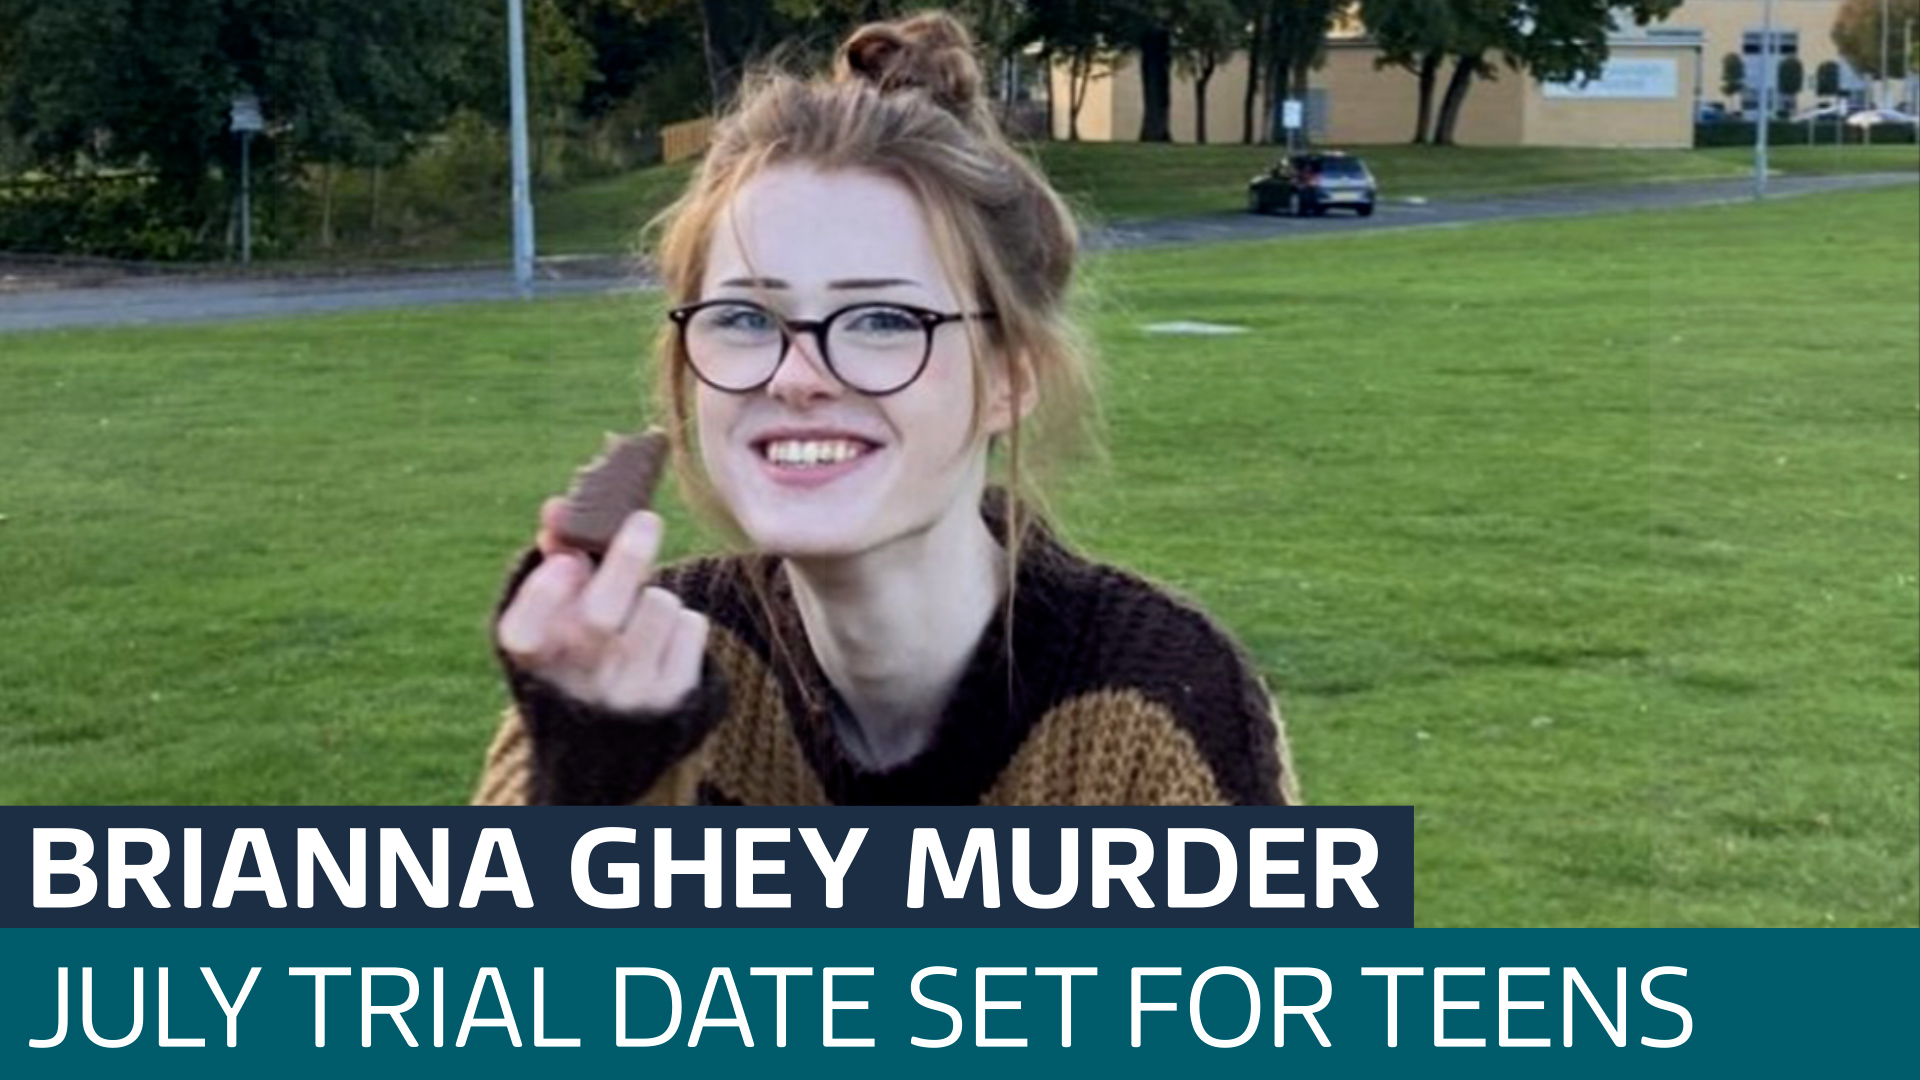 Trial date set for teenagers charged with murder of Brianna Ghey